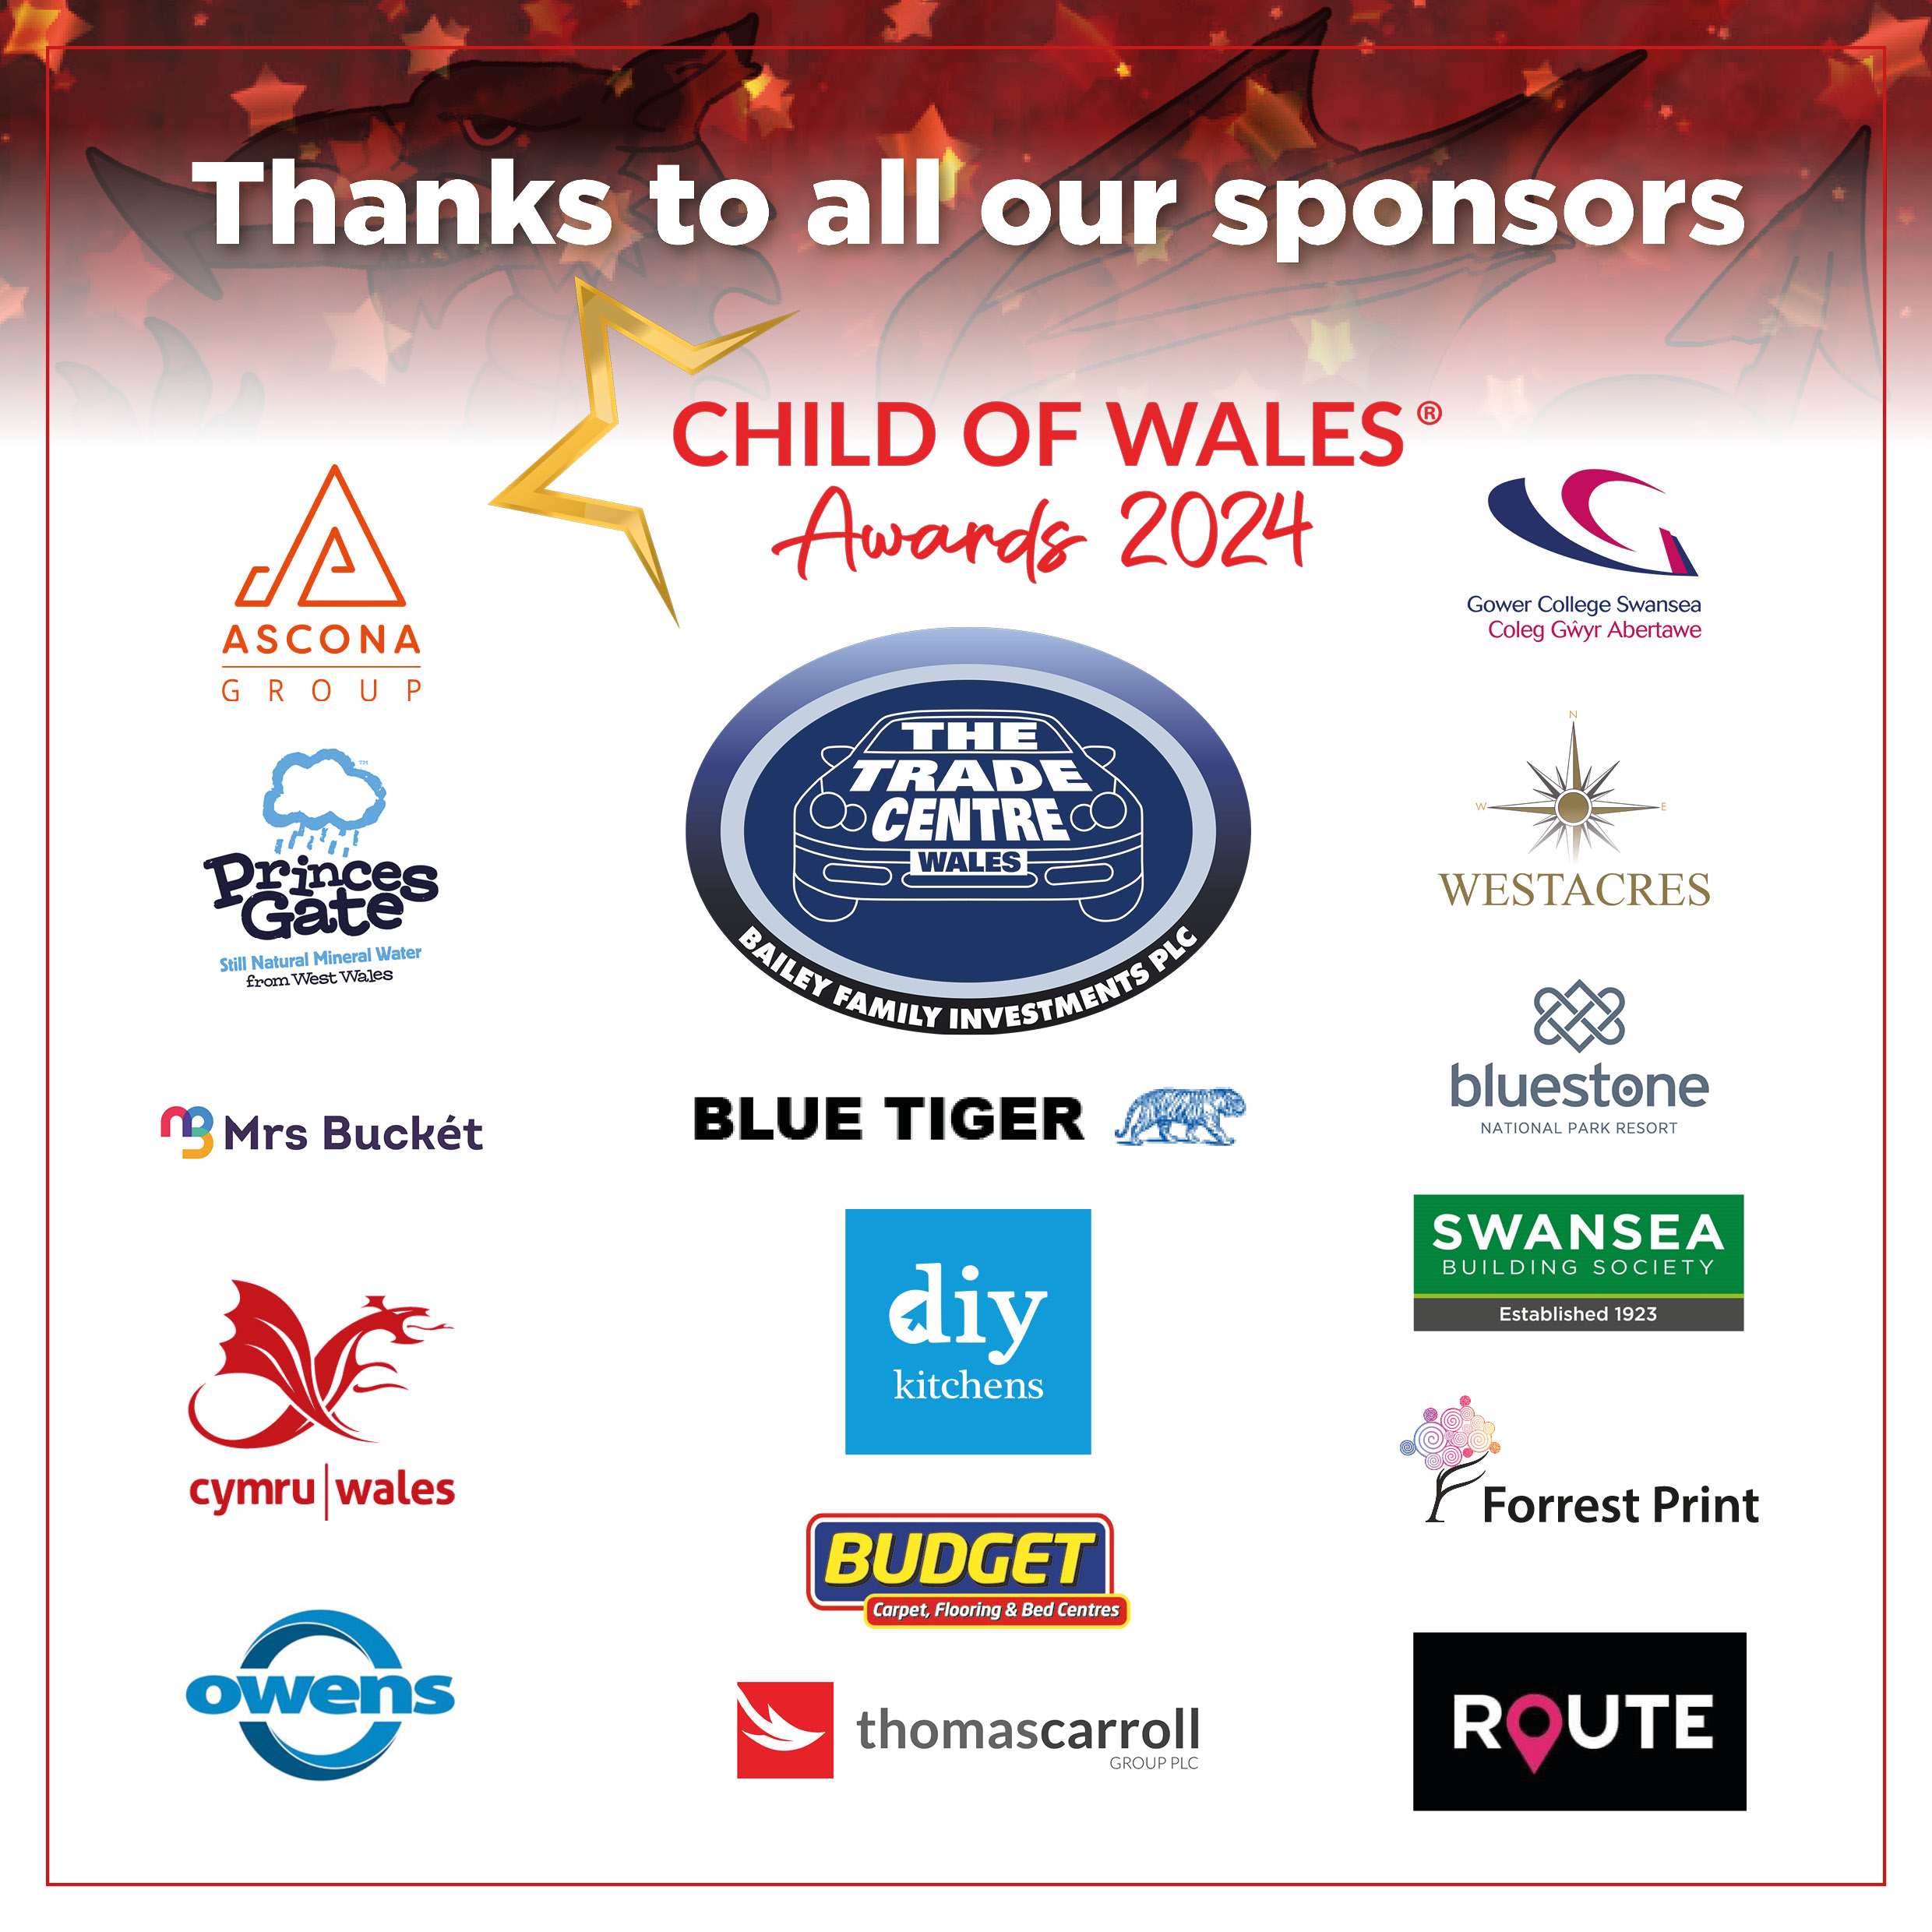 Meet the Child of Wales Awards 2024 sponsors and partners